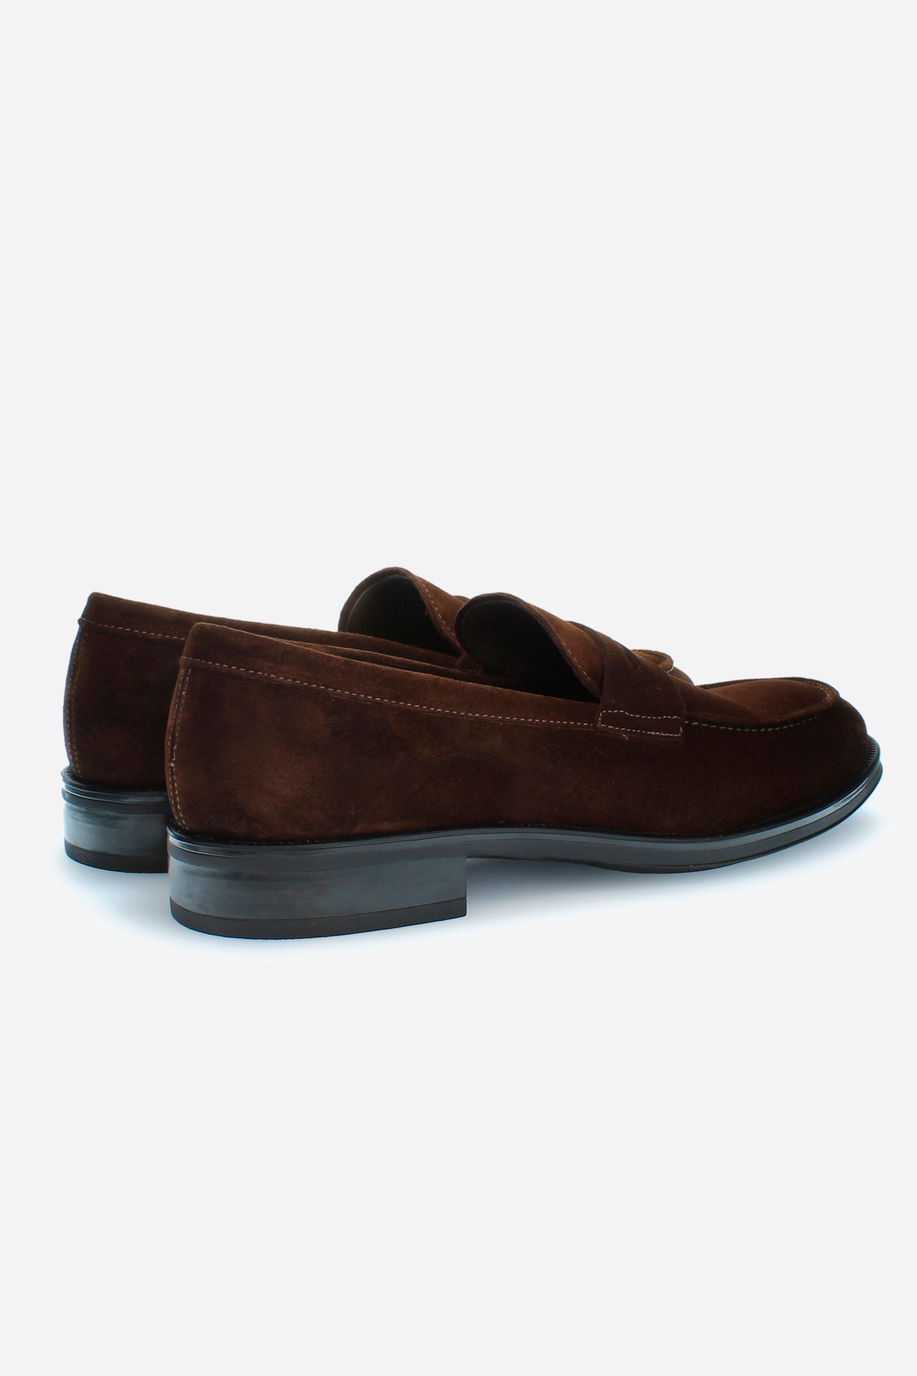 Men's college loafers in leather - Formal Shoes | La Martina - Official Online Shop